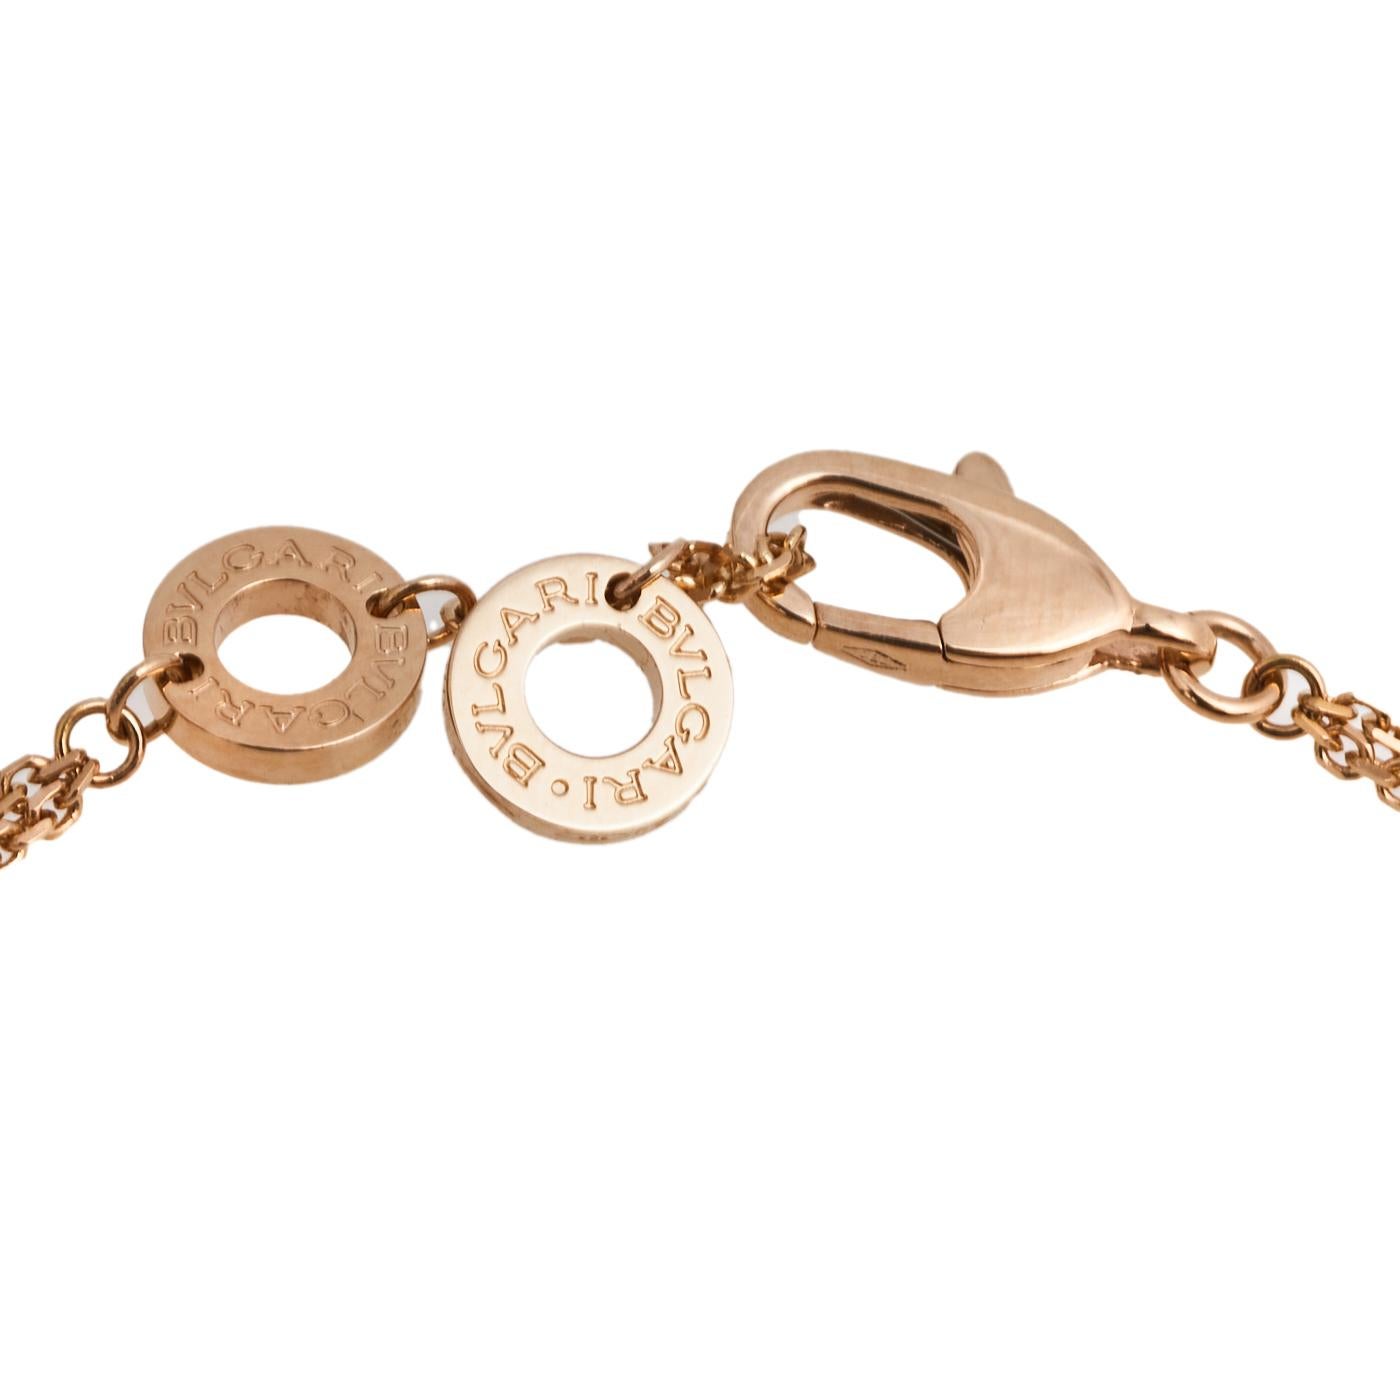 The grandeur of Italian beauty is reflected in this bracelet from Bvlgari's Divas' Dream collection. The line is inspired by the fan-shaped mosaics of the Caracalla Baths in Rome, a detail the brand has interpreted with mastery. This bracelet is